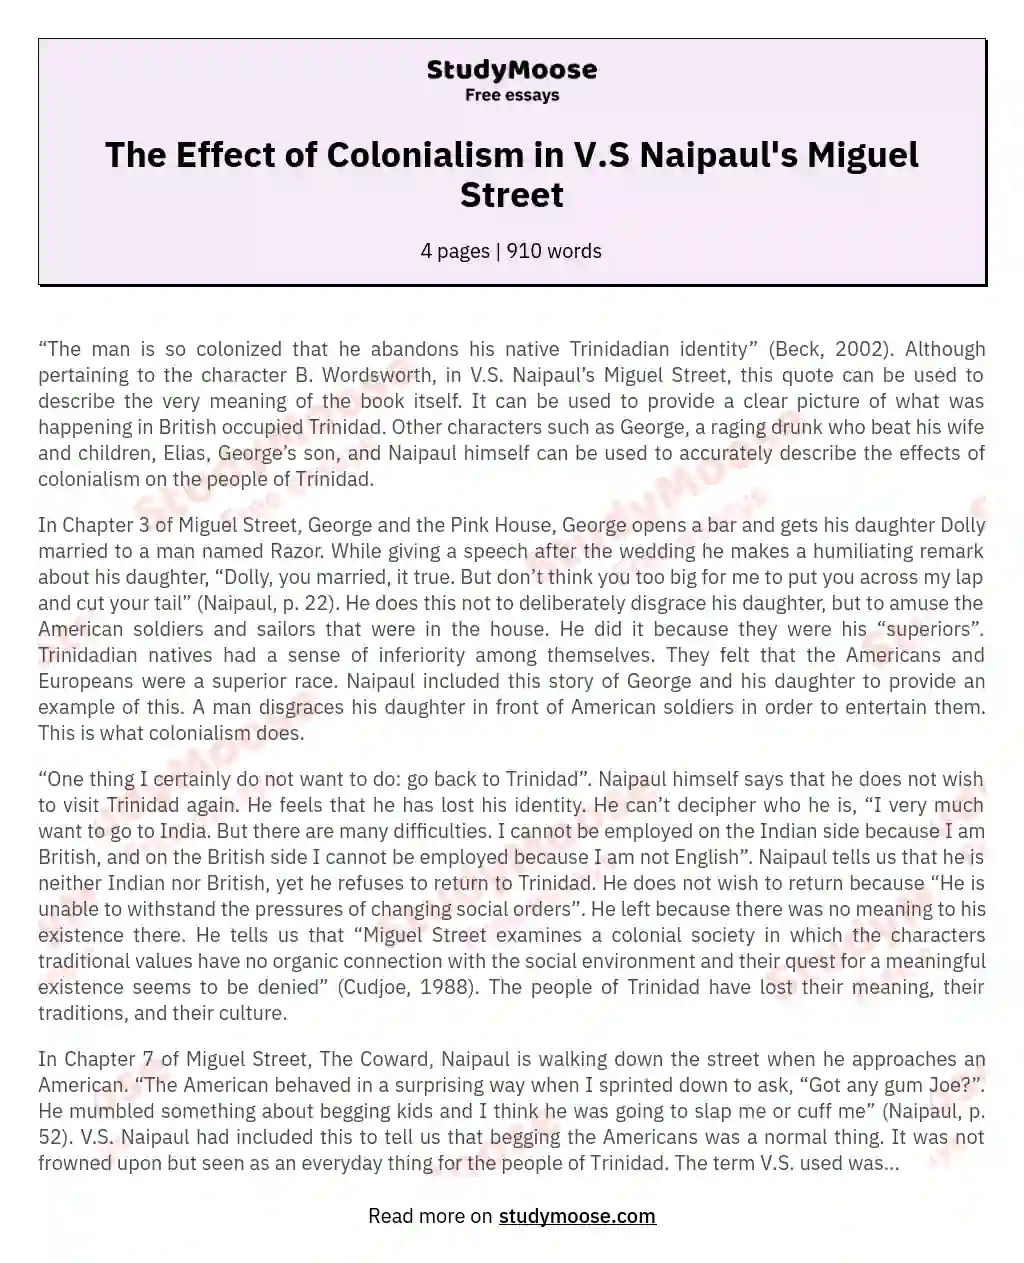 The Effect of Colonialism in V.S Naipaul's Miguel Street essay